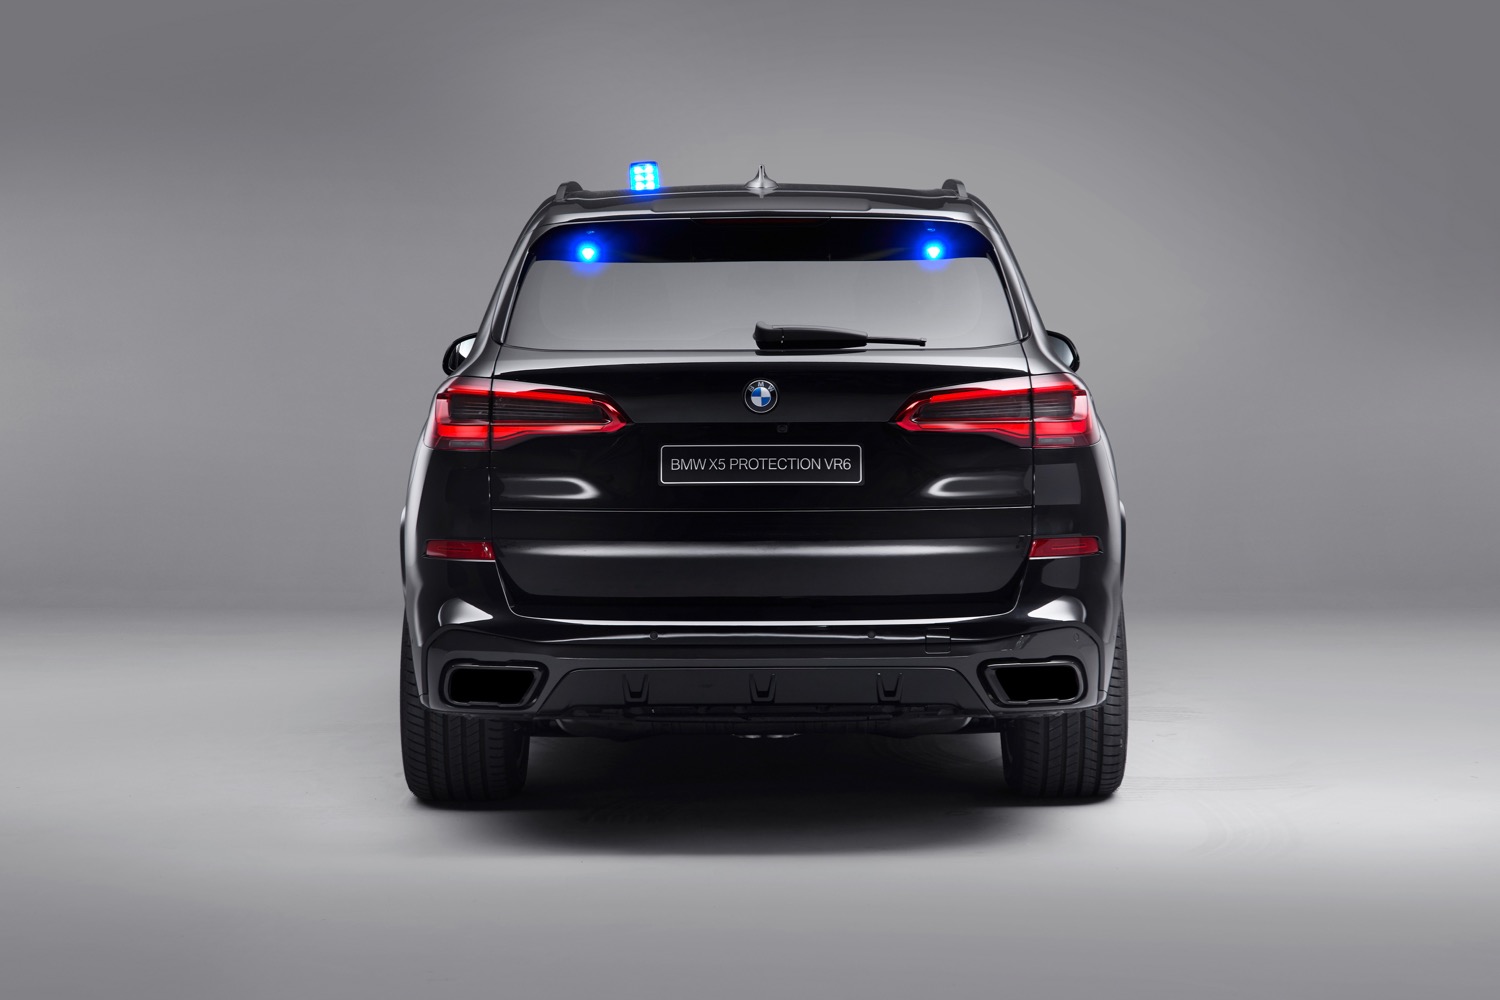 bmw x5 protection vr6 armored suv